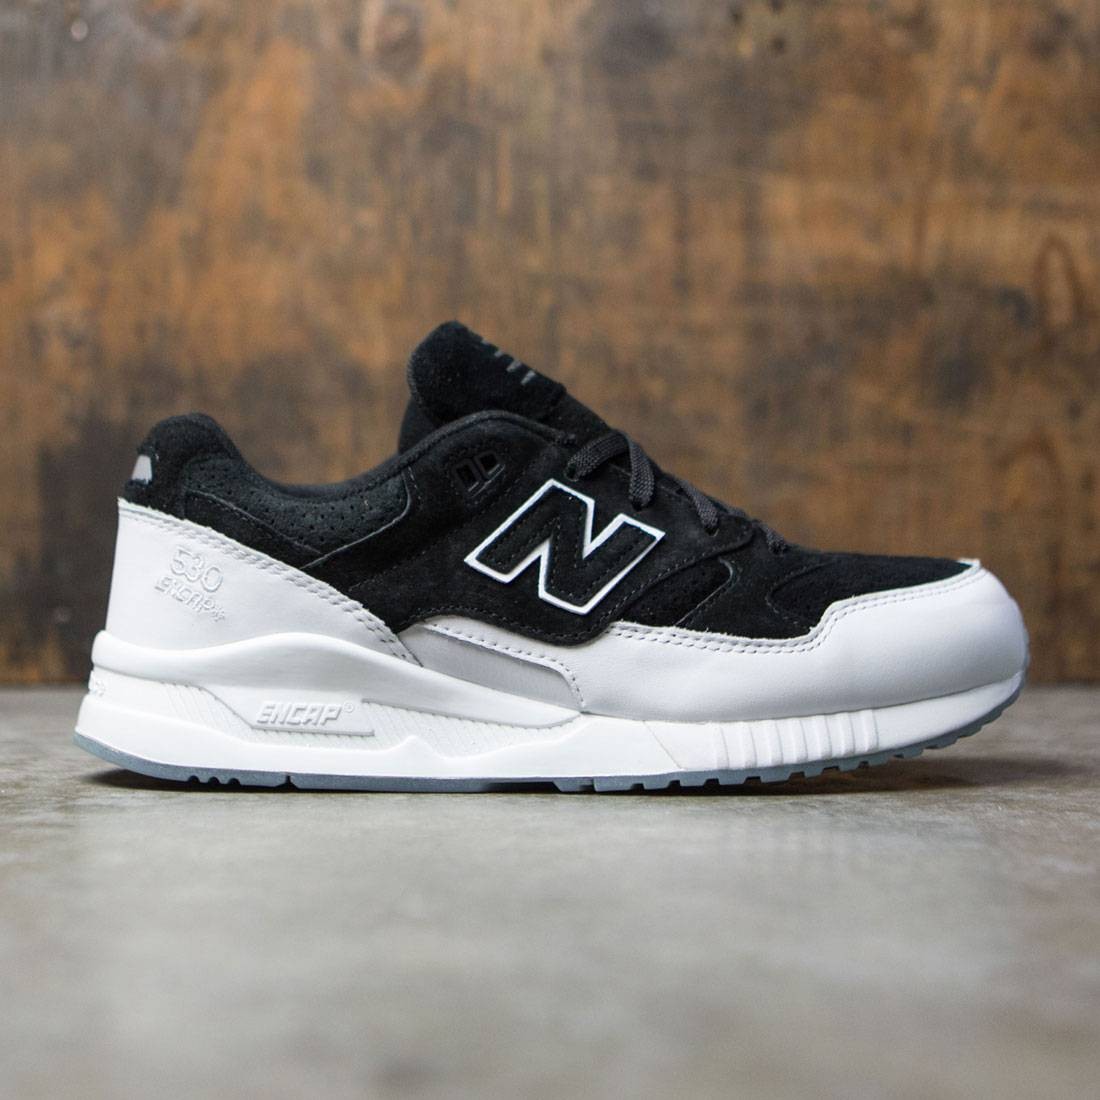 new balance white suede